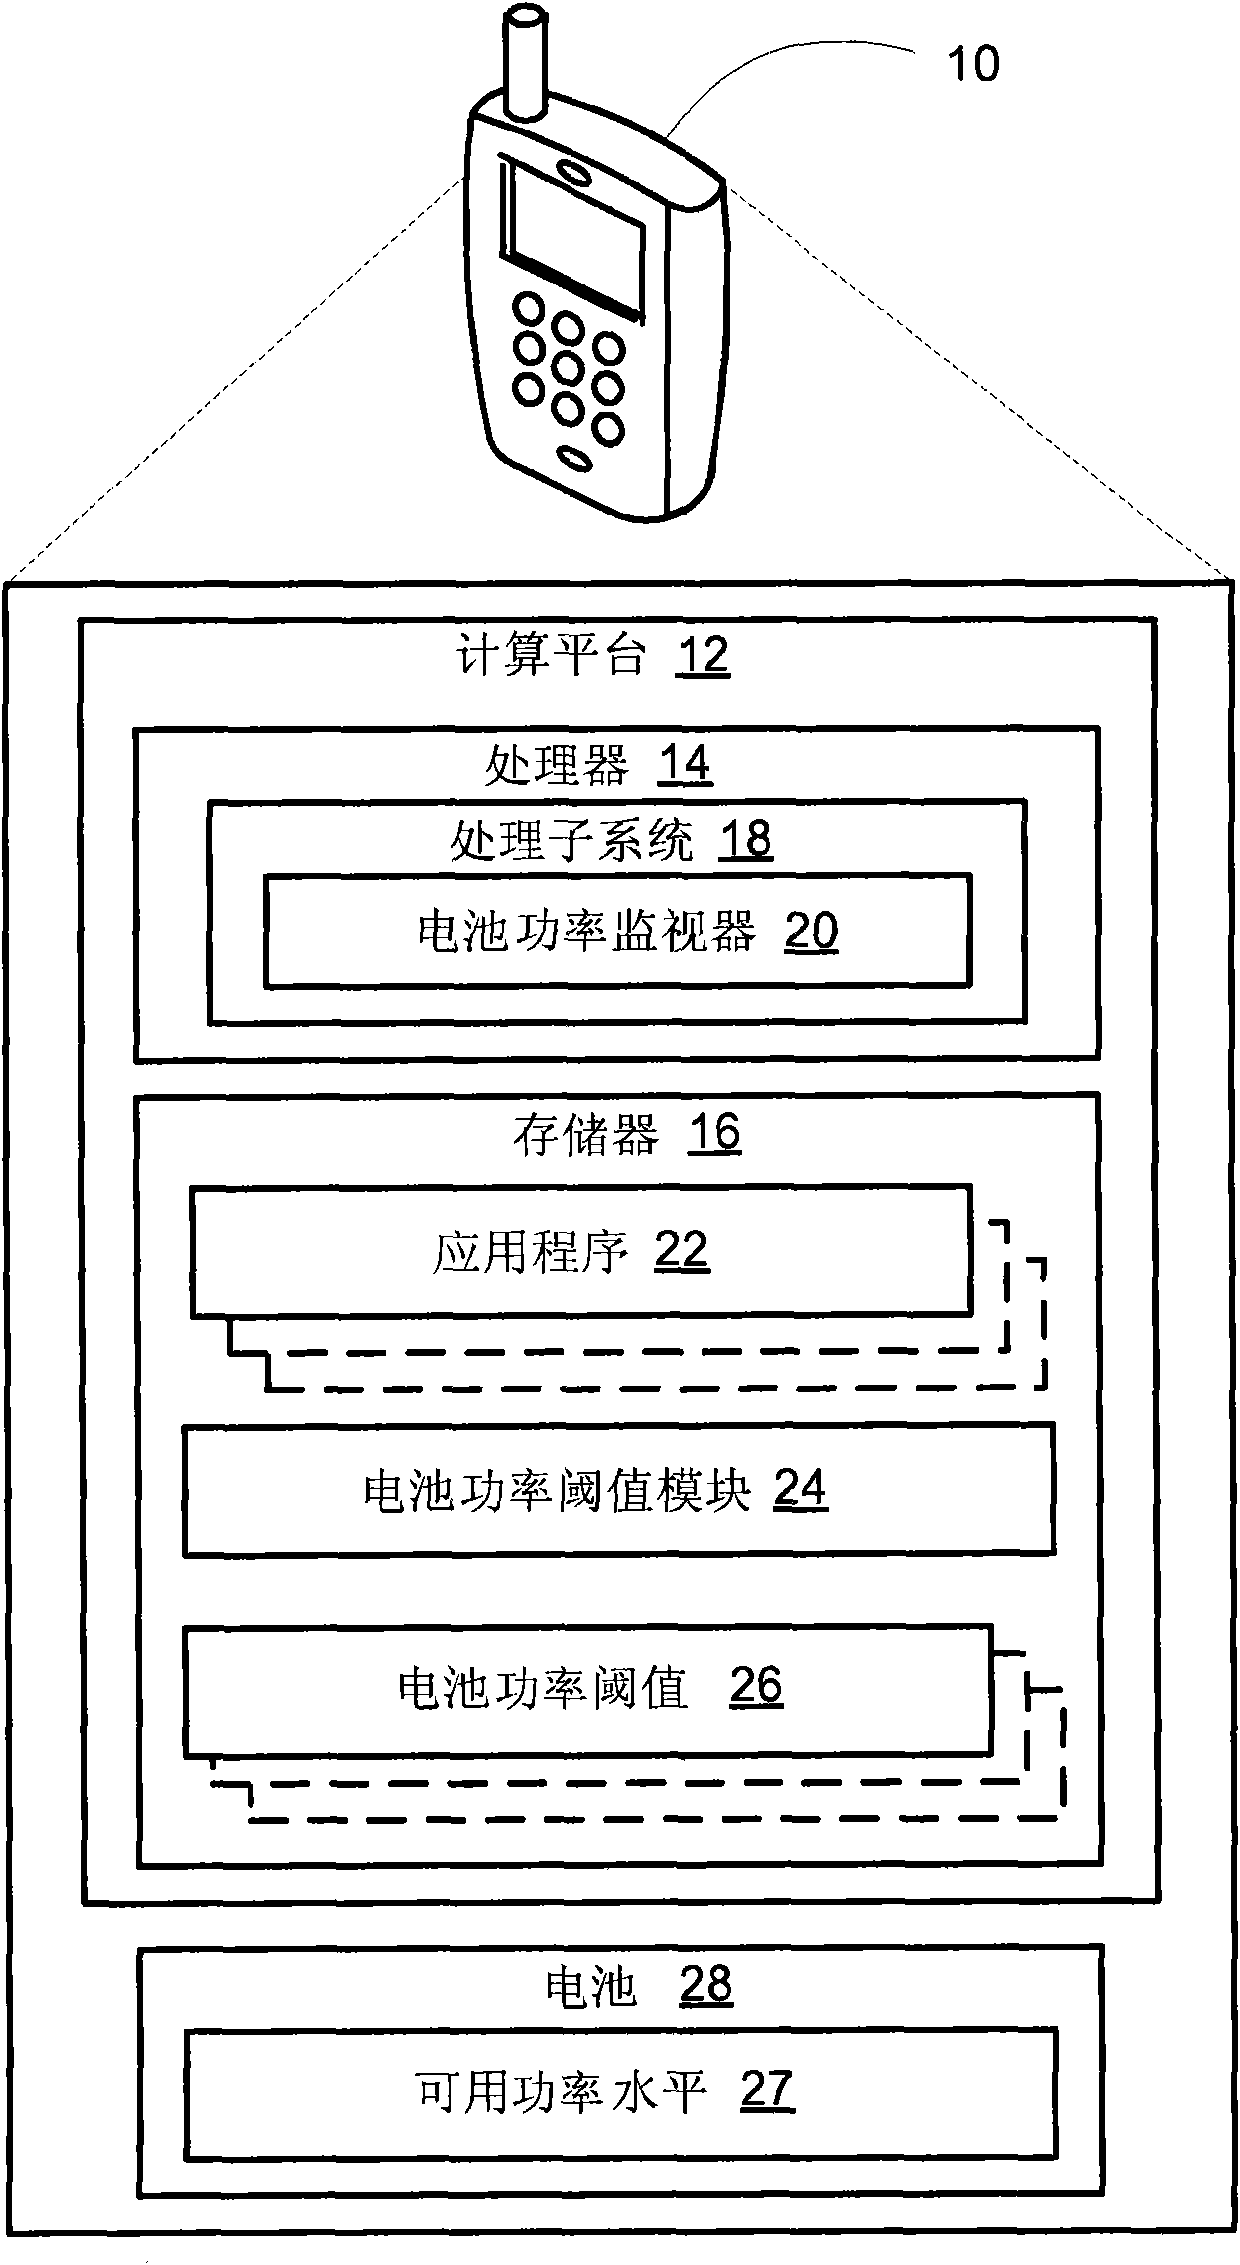 Methods and device for limiting battery power consumption in a wireless communication device